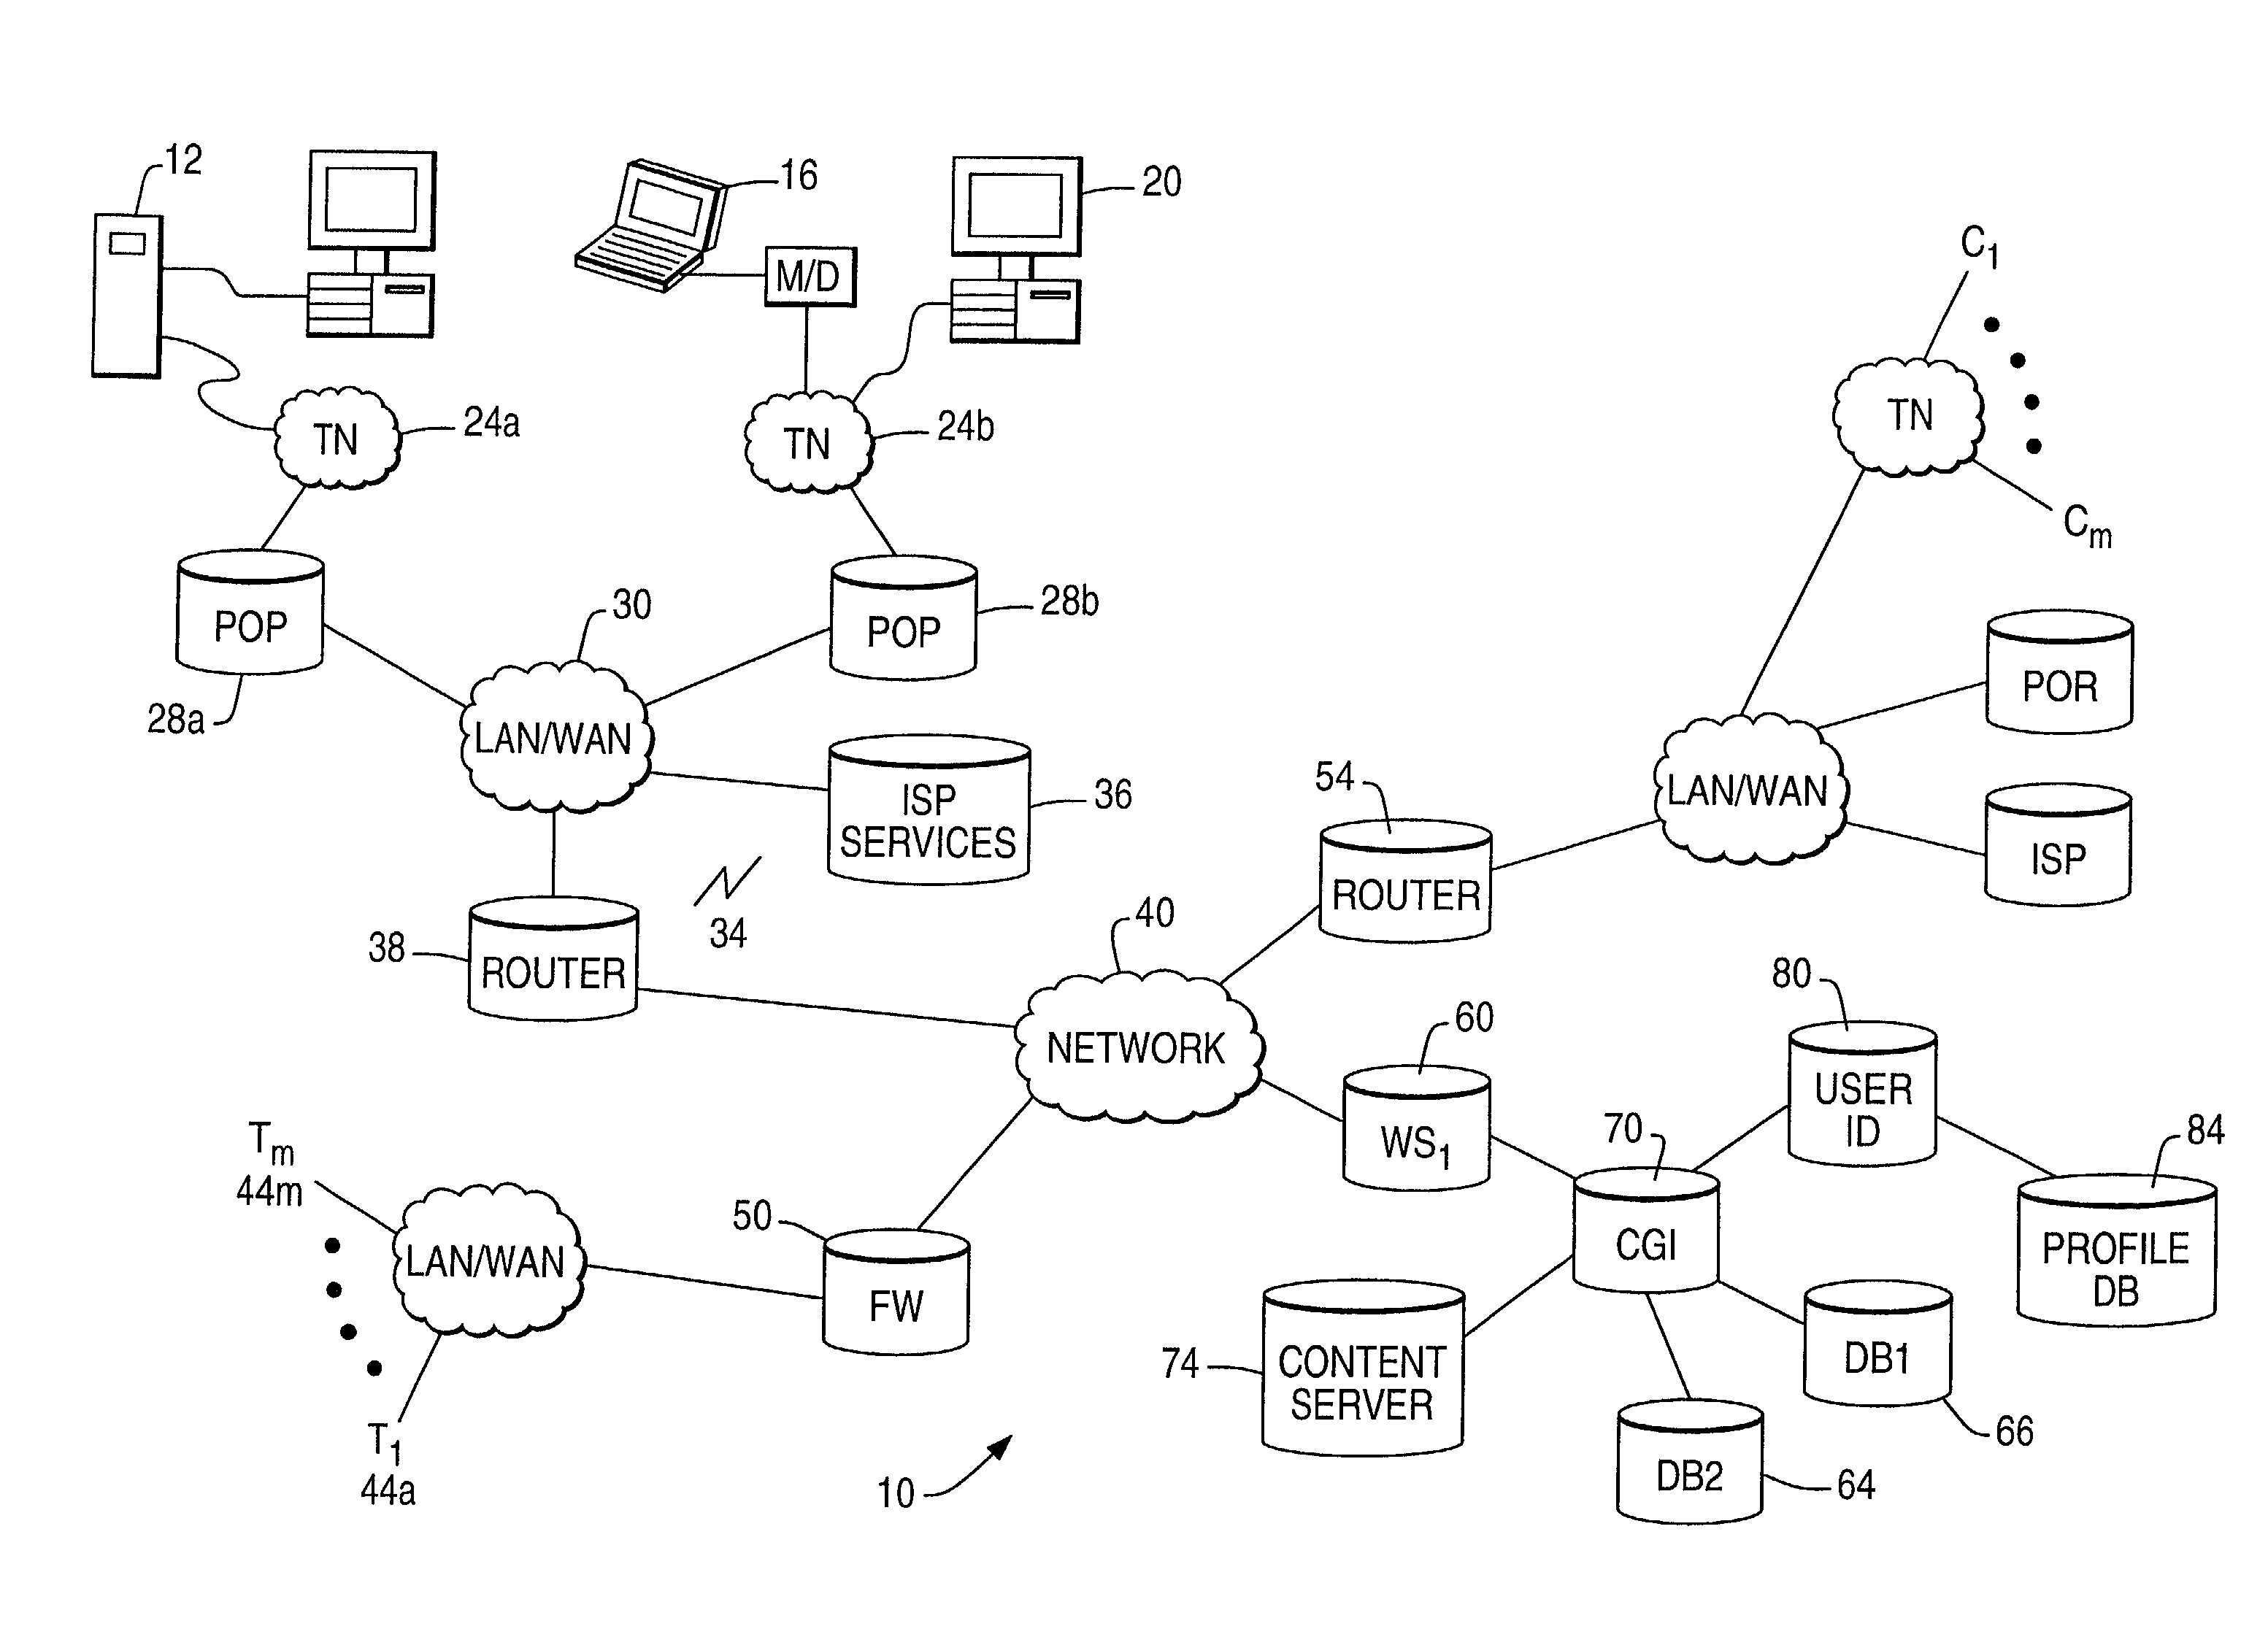 System and method for profiling different users having a common computer identifier